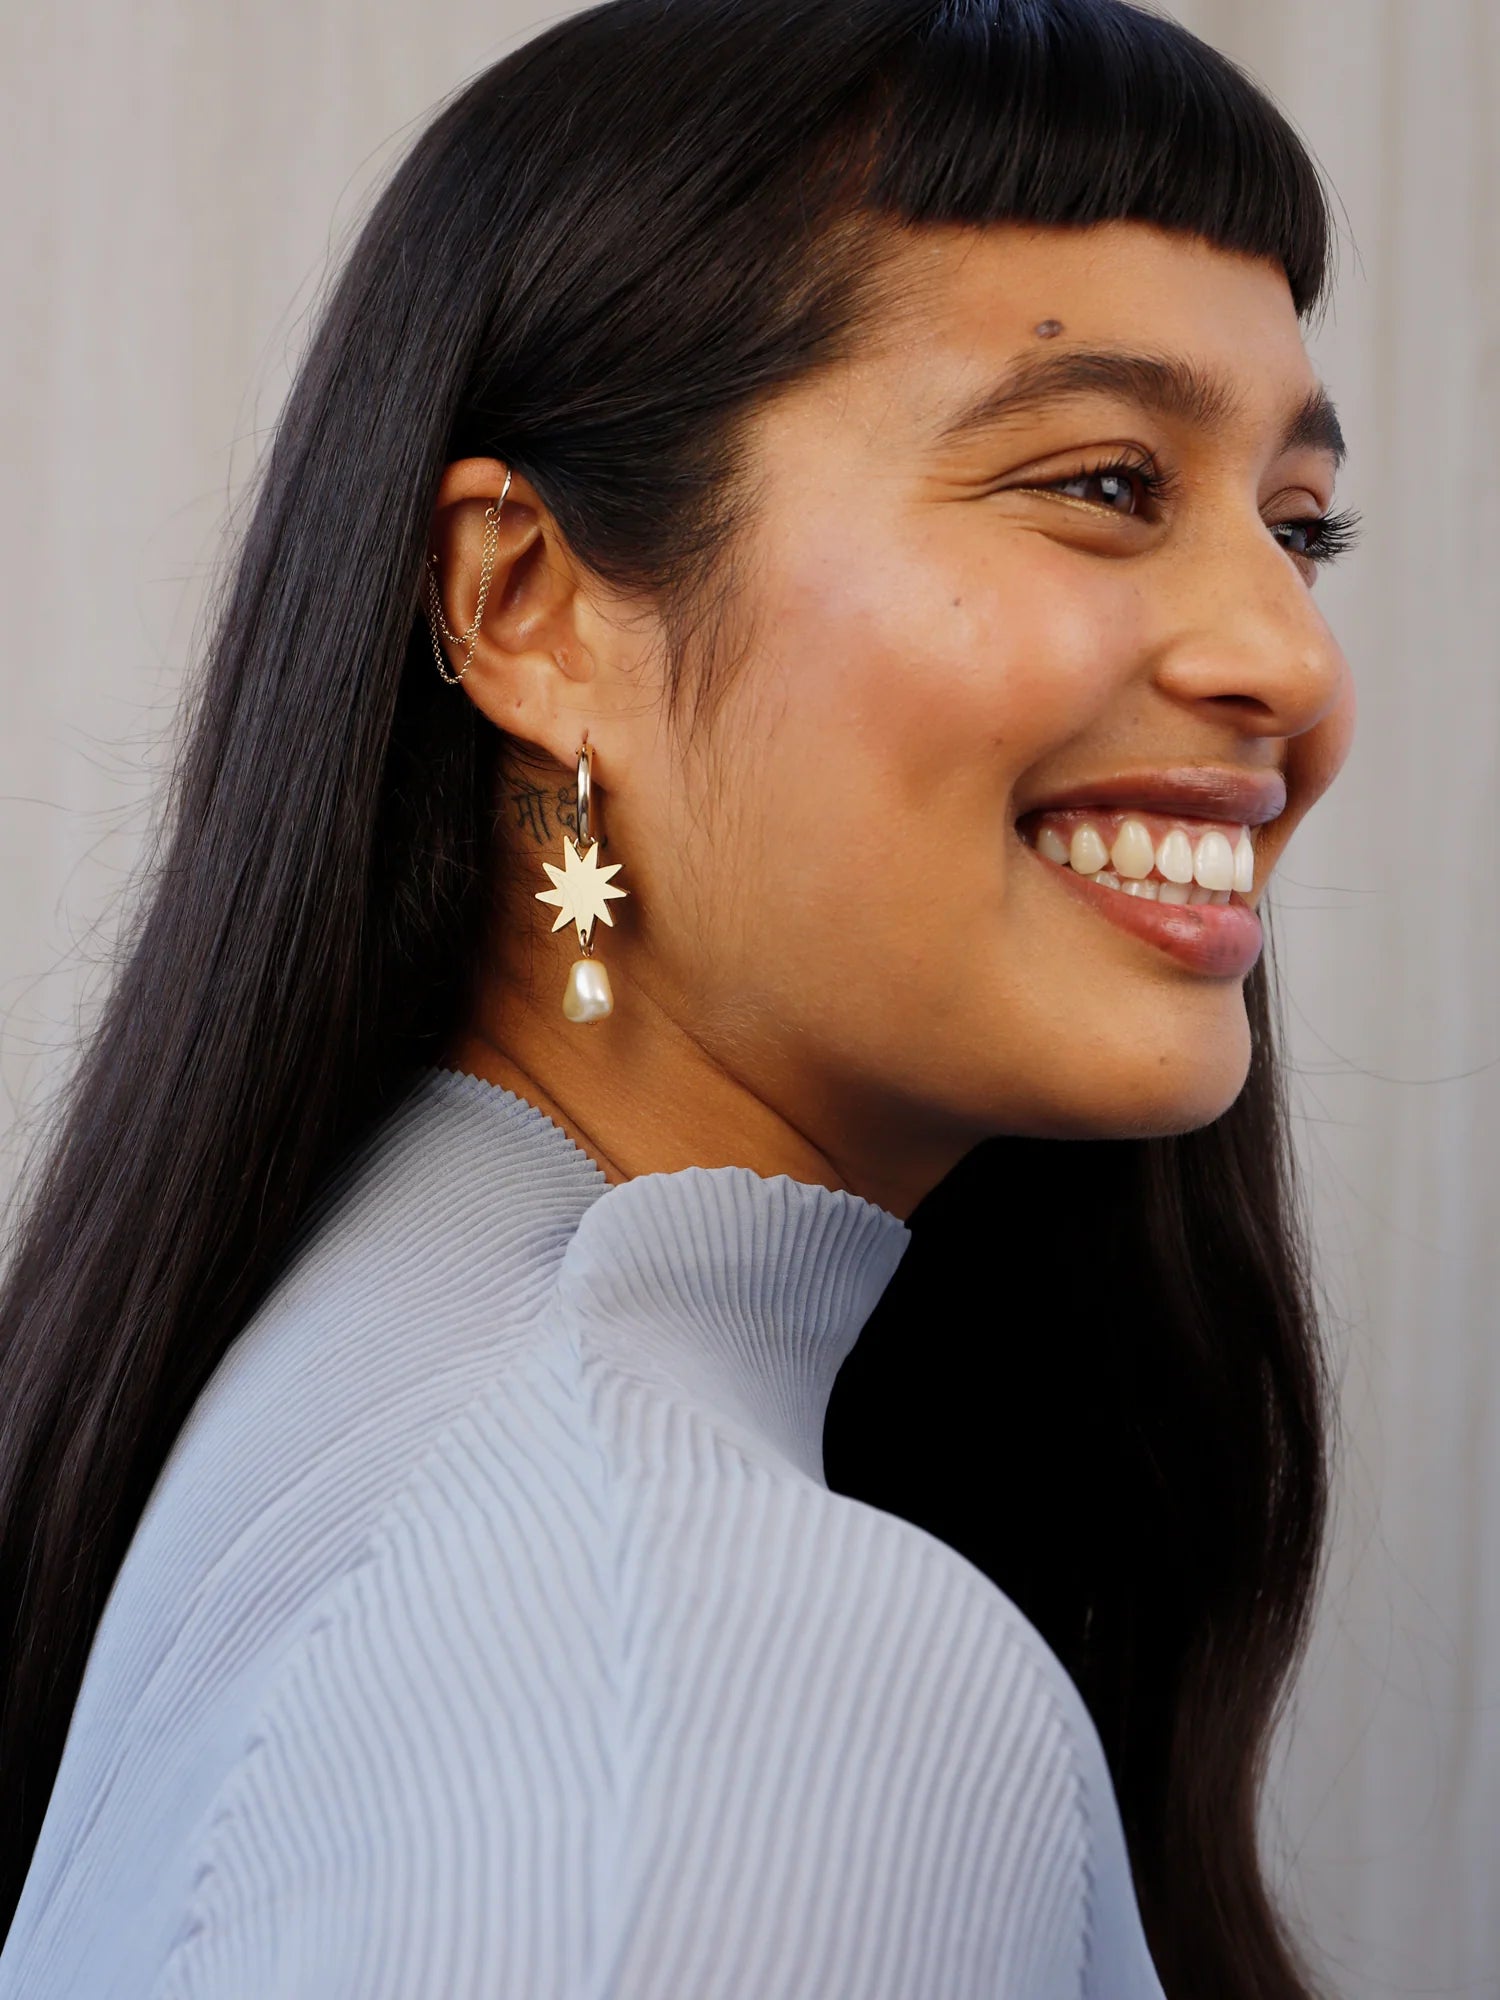 Kara hoop earring with star and pearl pendant from Wolf&Moon on model